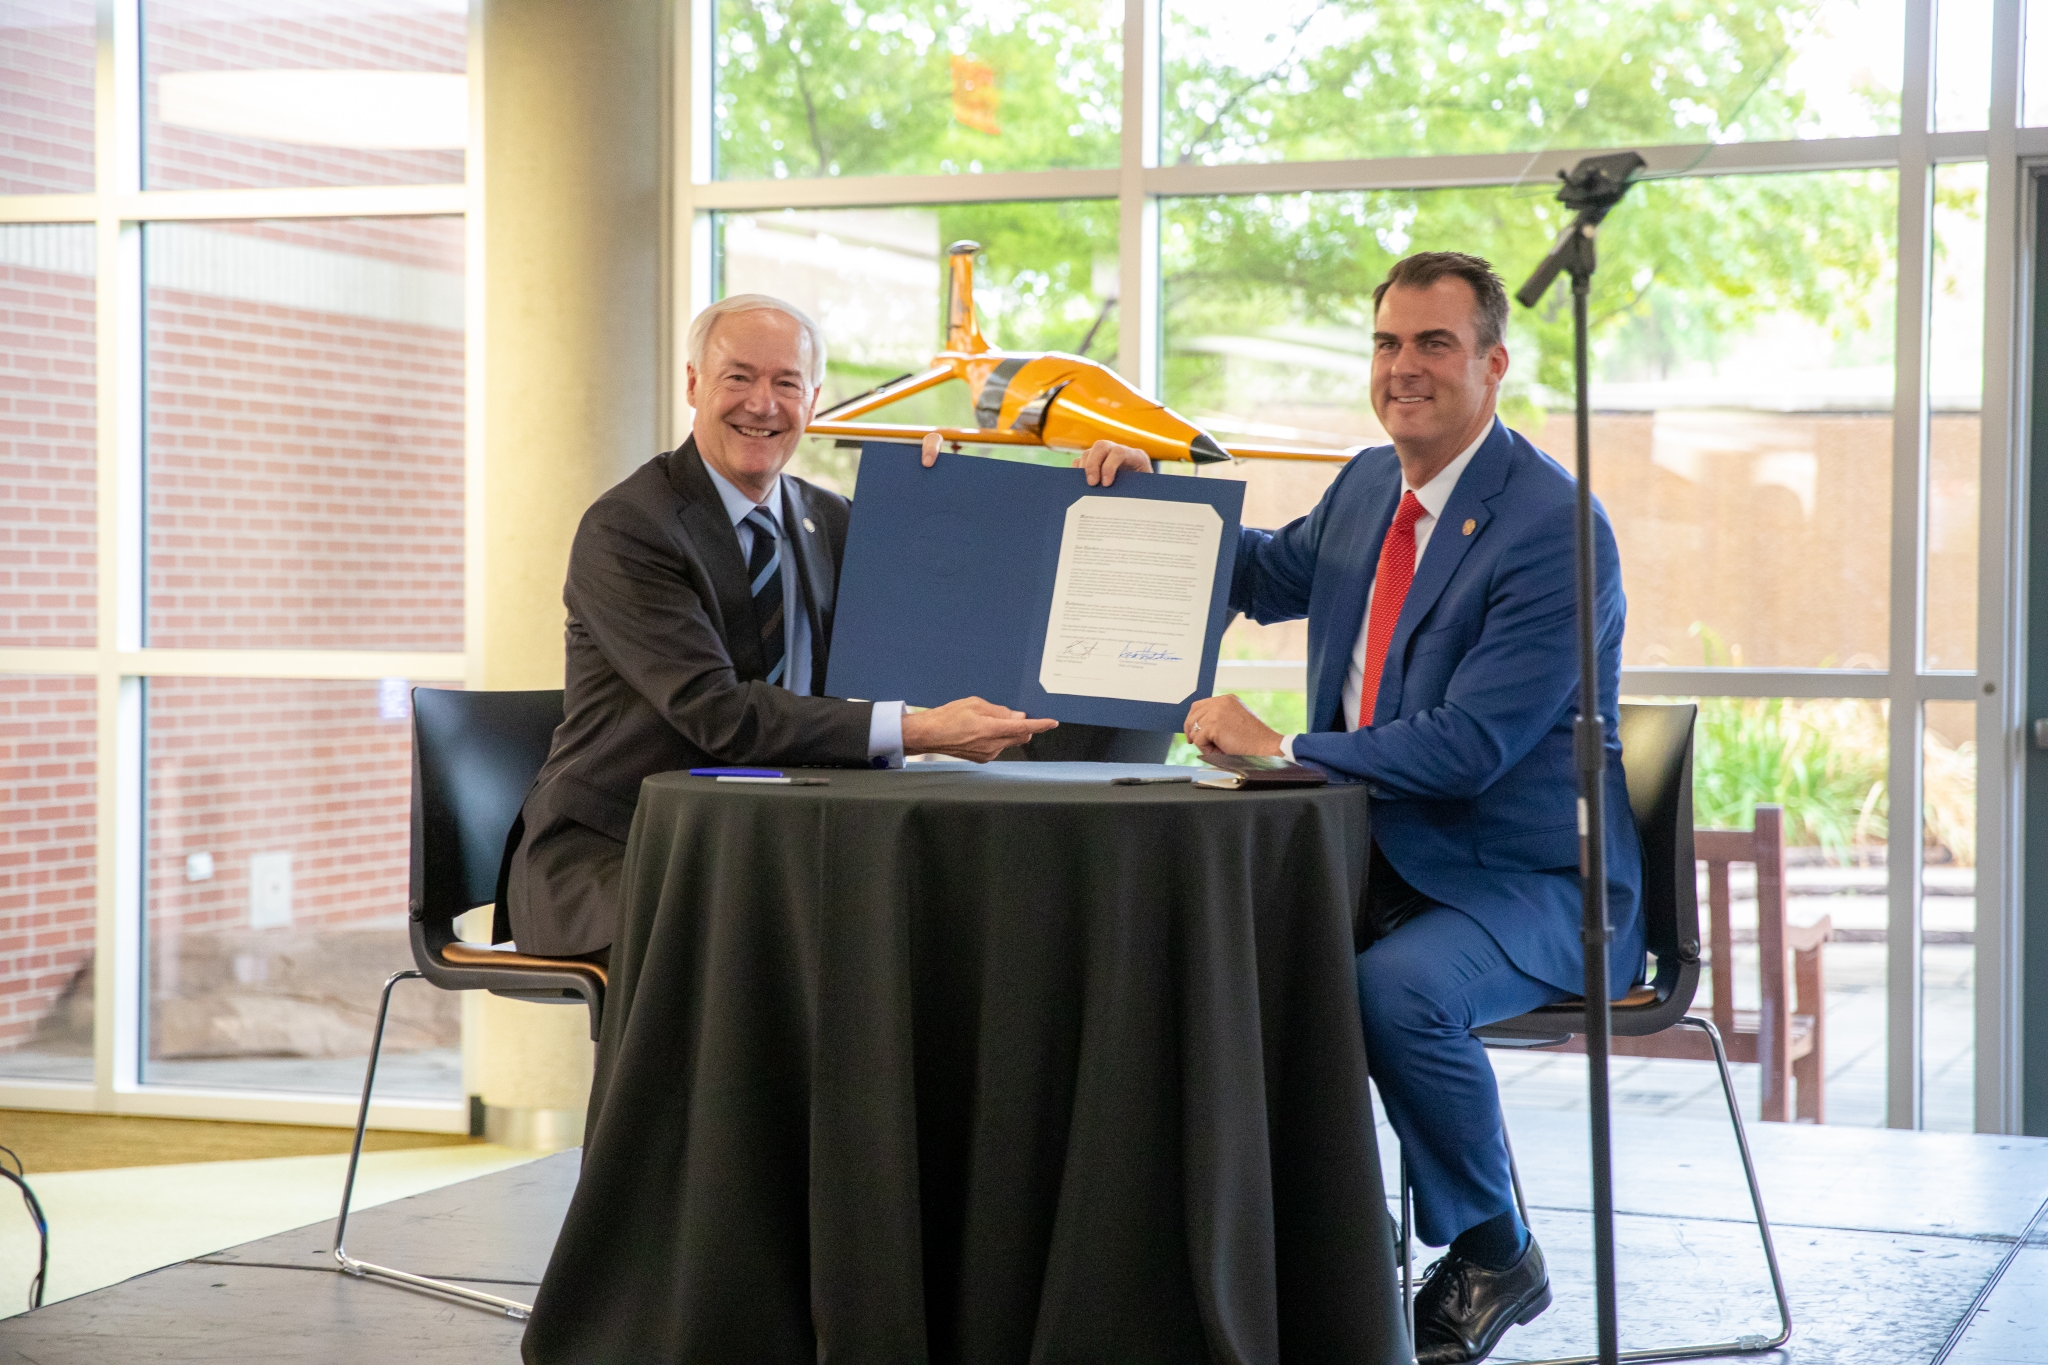 Governors Asa Hutchinson and Kevin Stitt sign the official agreement on Advanced Mobility between their respective states of AR and OK.